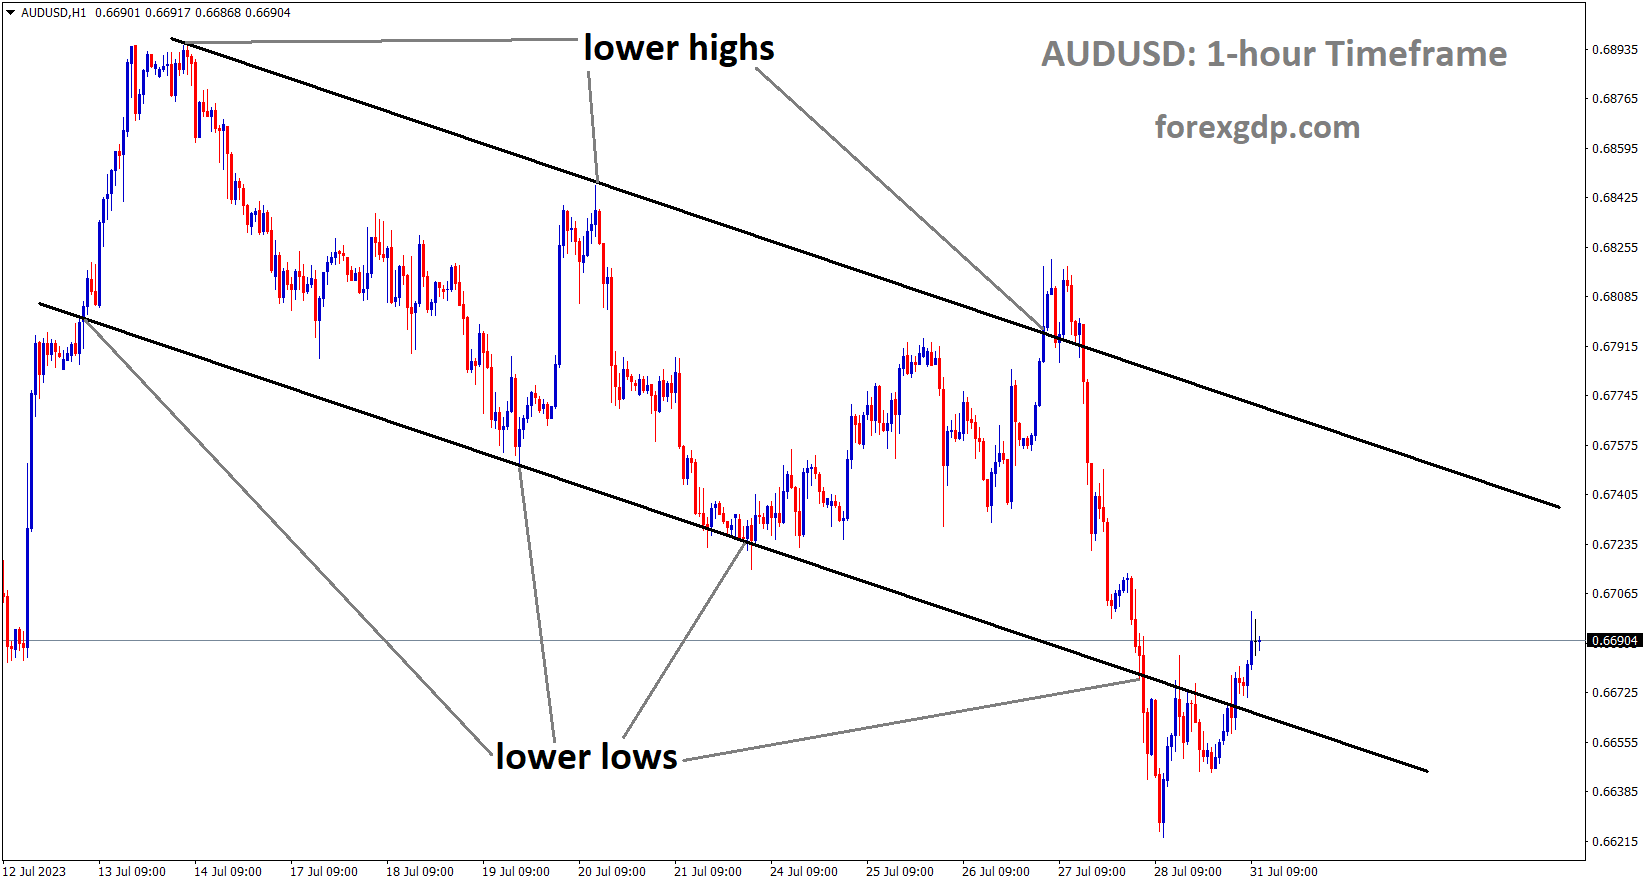 AUDUSD is moving in the Descending channel and the market has rebounded from the lower low area of the channel 2